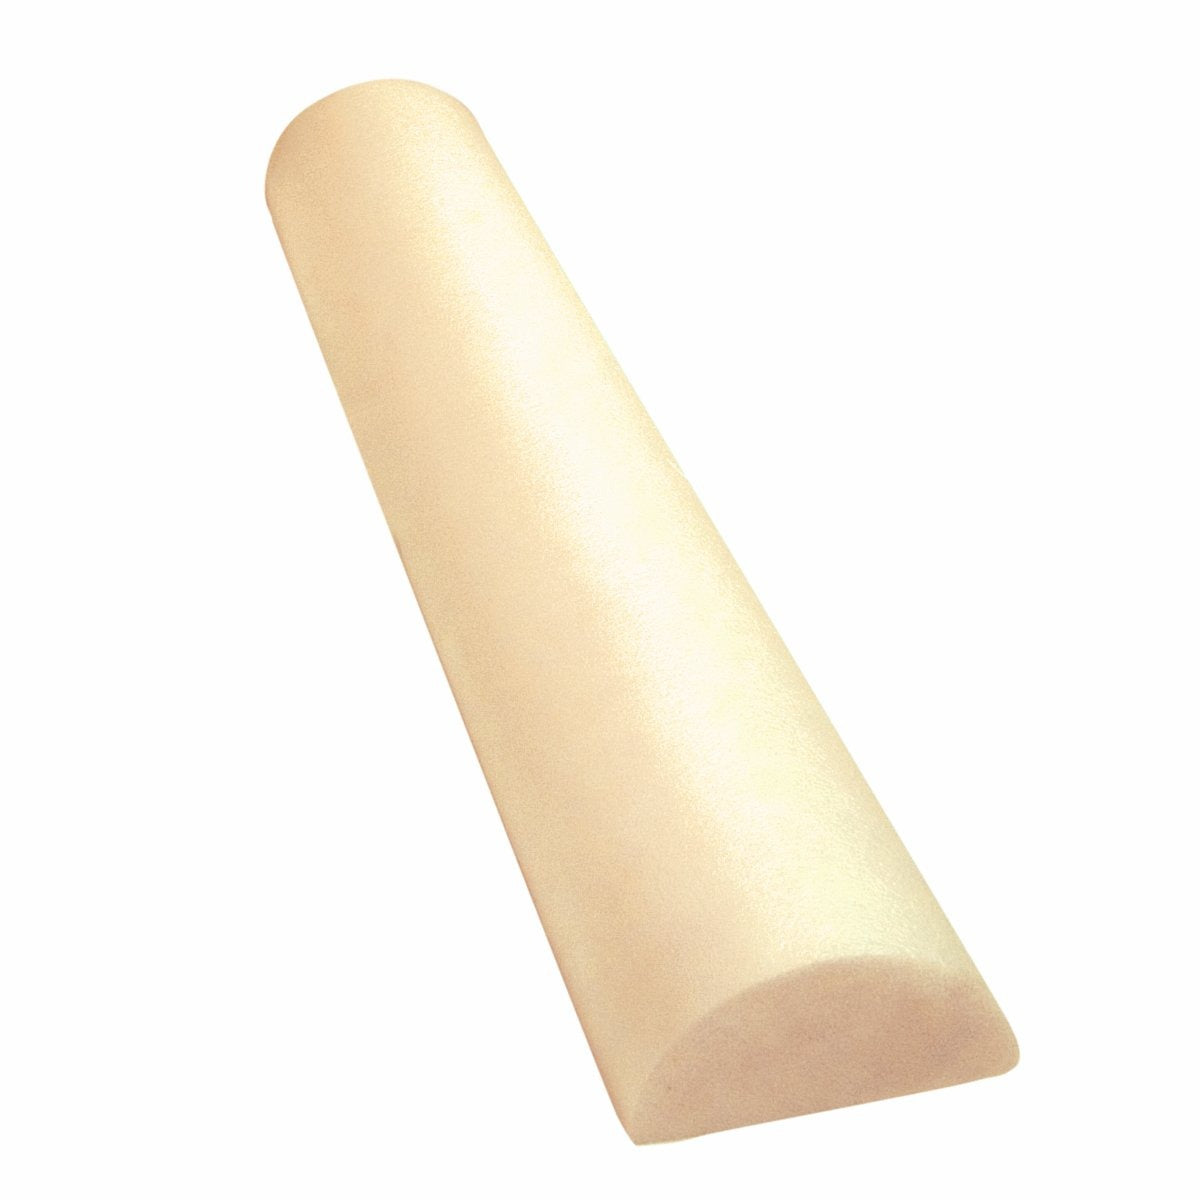 Cando CanDo Full-Skin White PE Foam Roller For Muscle Restoration, Massage Therapy, Sport Recovery, And Physical Therapy.